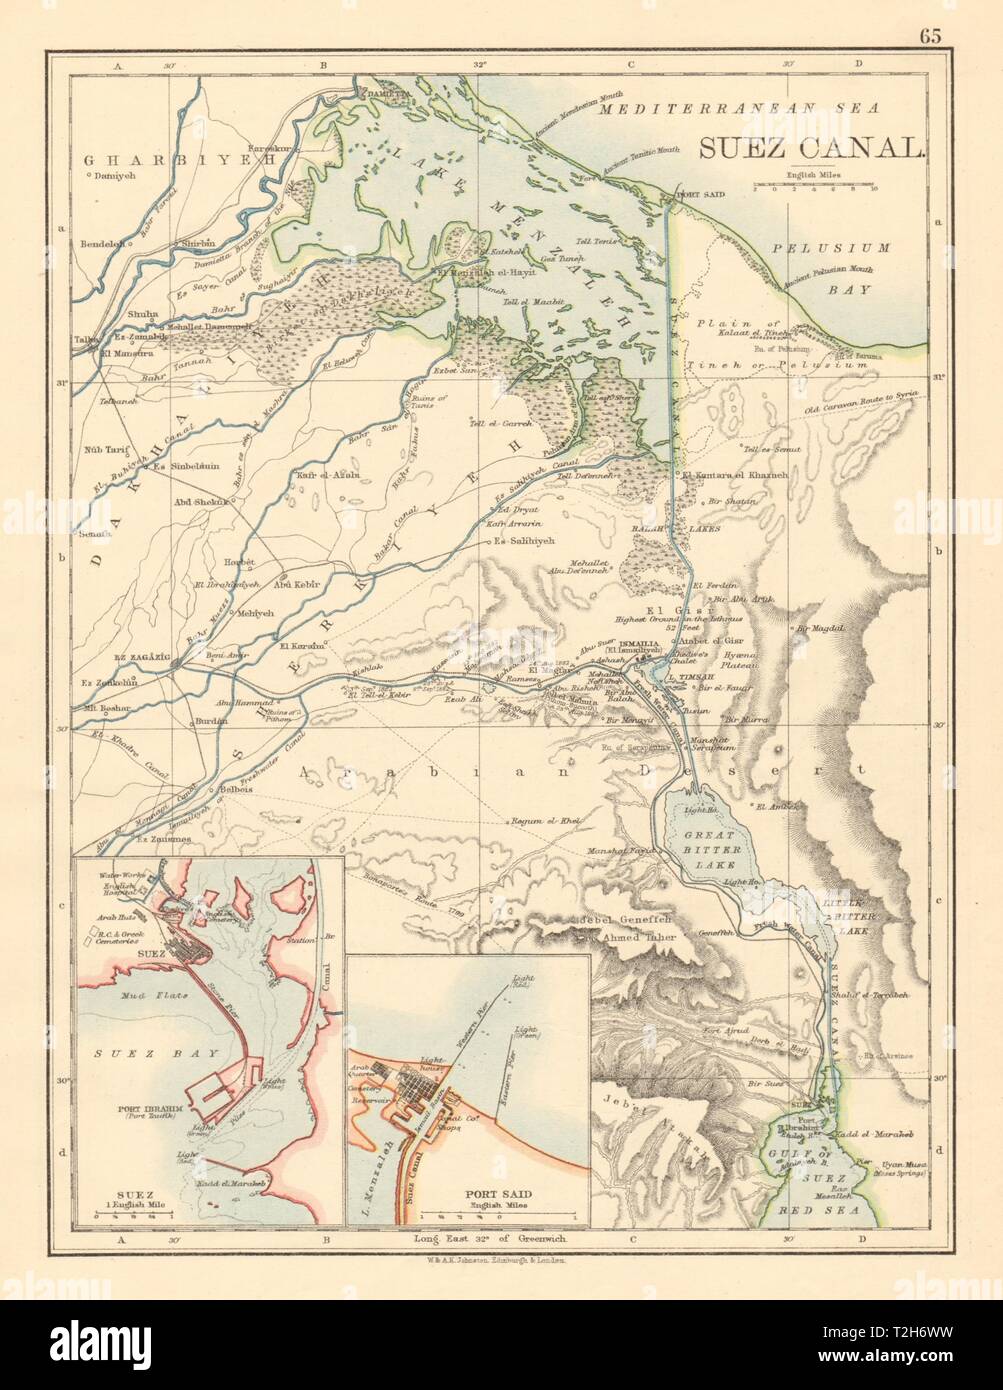 SUEZ CANAL Plan of the canal. Plans of Suez & Port Said JOHNSTON 1892 old map Stock Photo